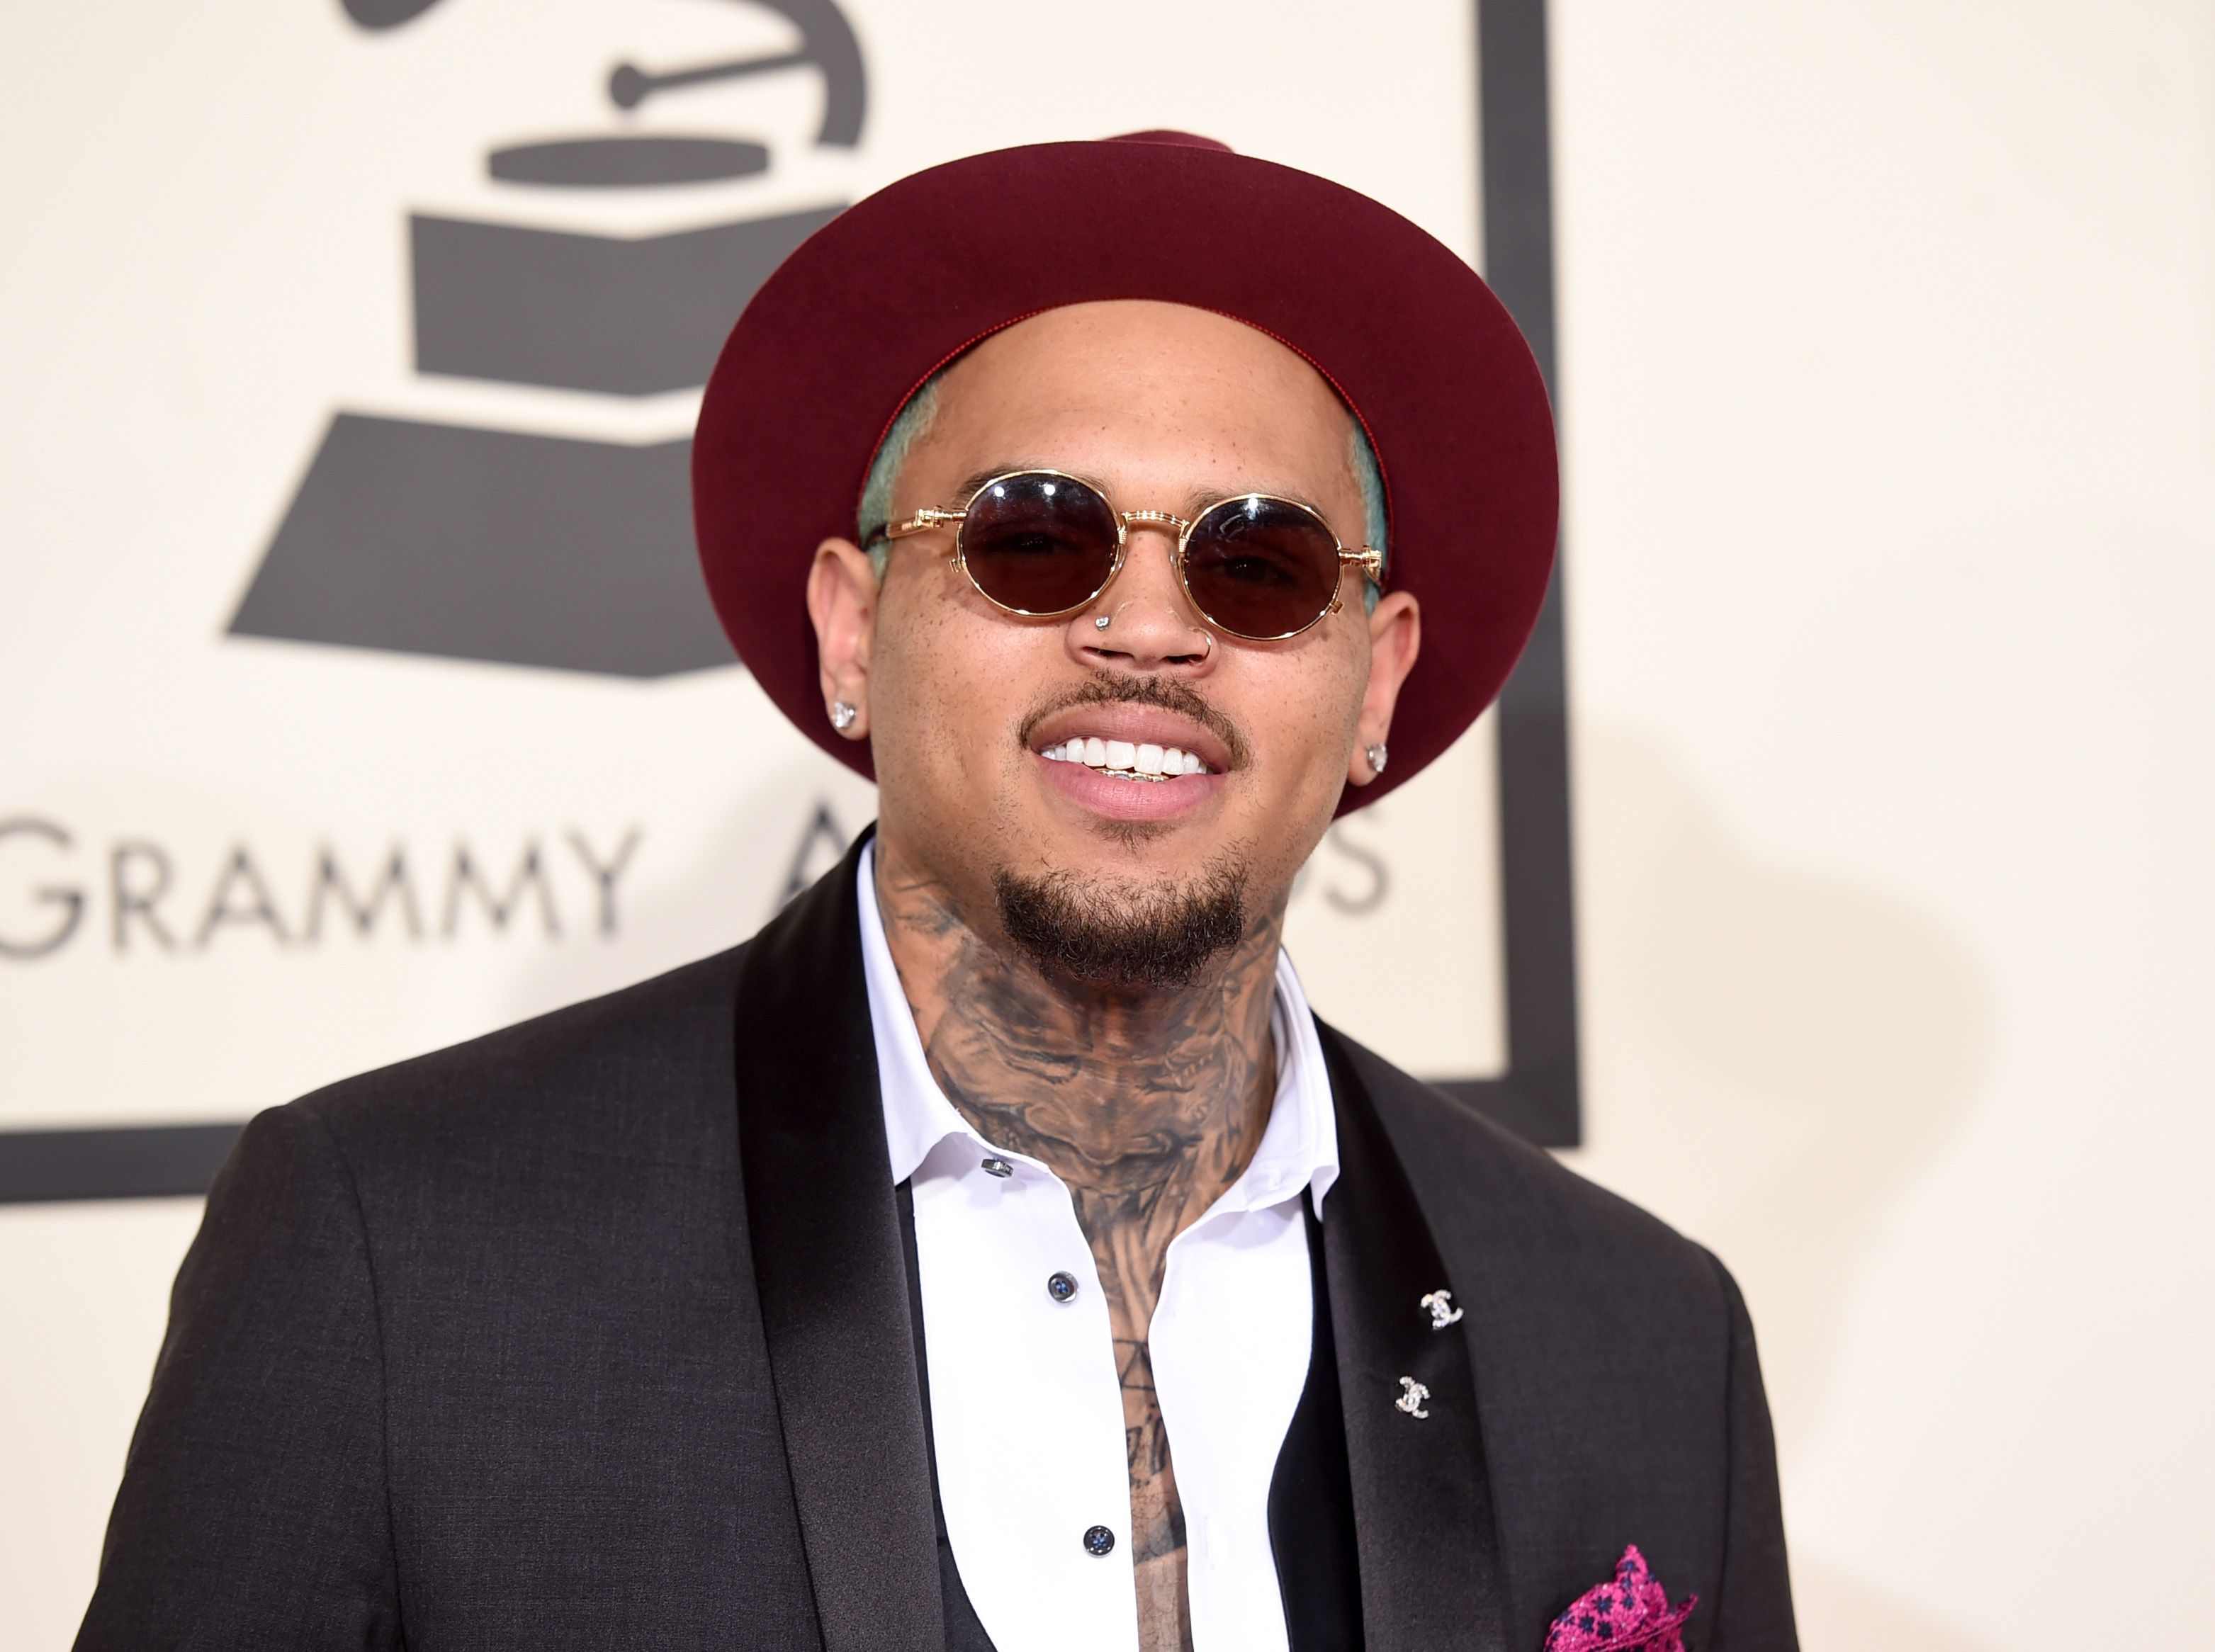 Chris Brown during the 57th Annual Grammy Awards at the Staples Center on February 8, 2015 in Los Angeles, California. | Source: Getty Images